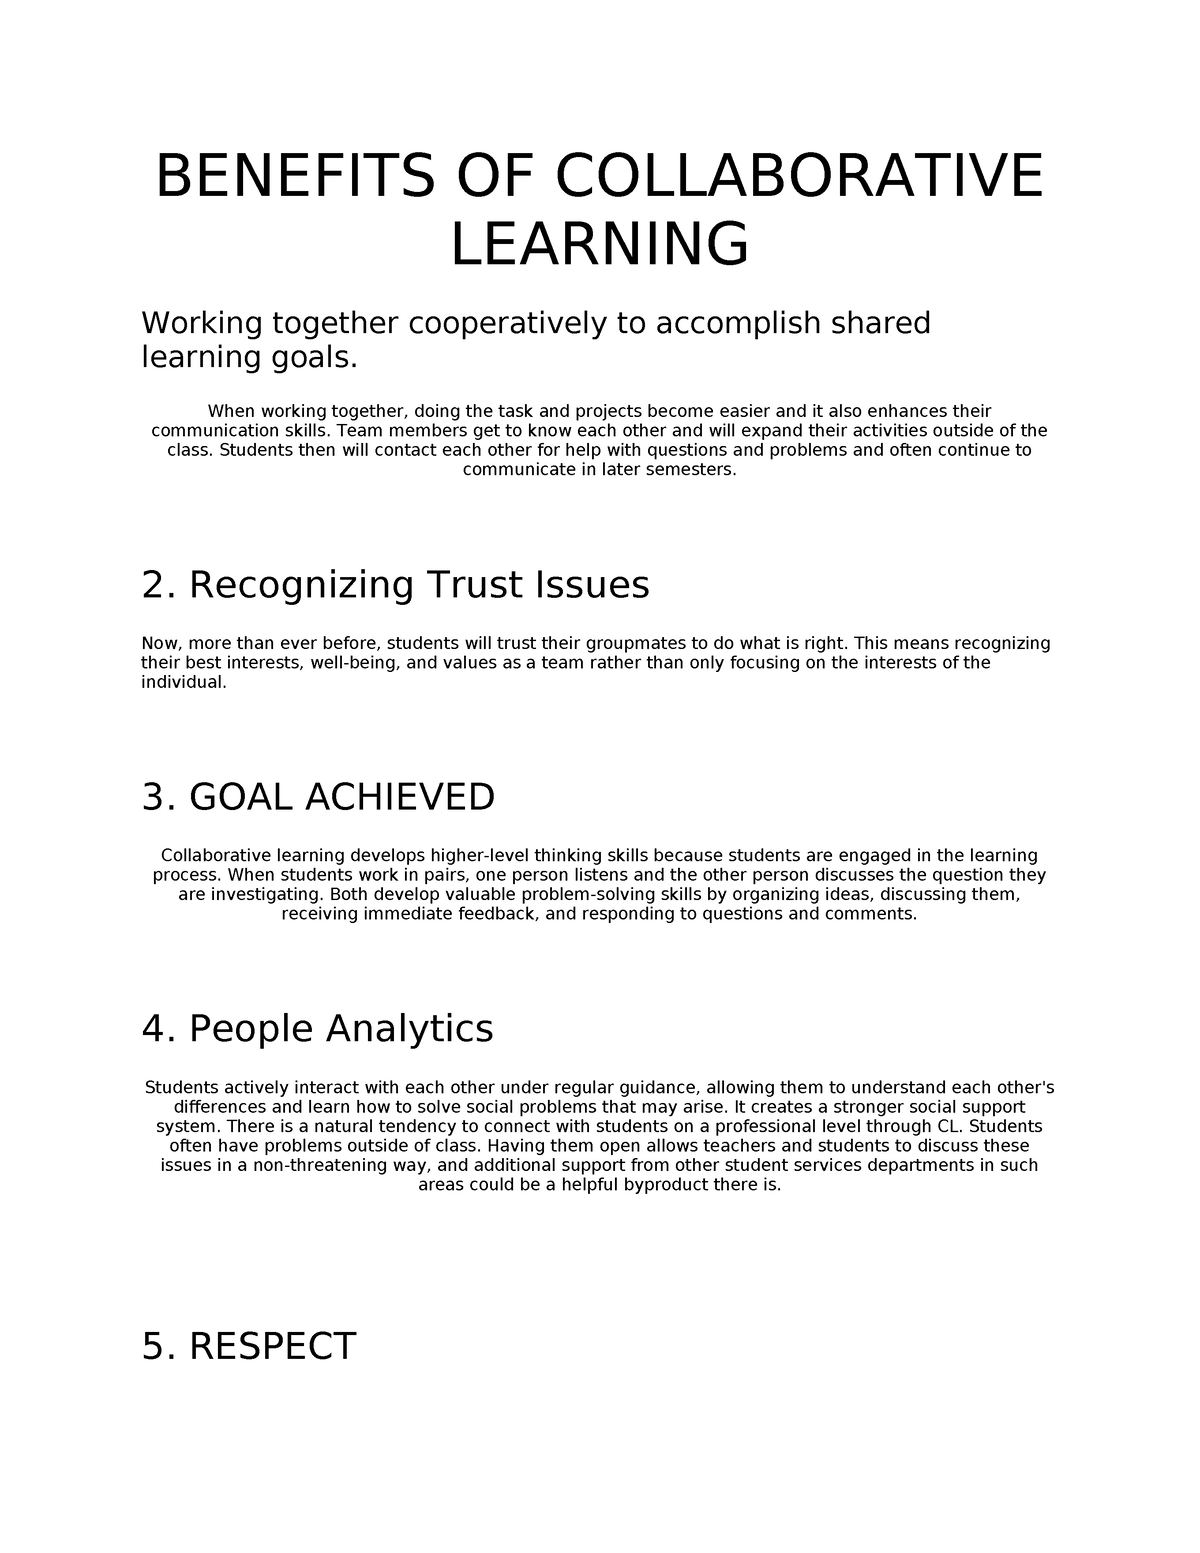 Benefits OF Collaborative Learning - BENEFITS OF COLLABORATIVE LEARNING ...